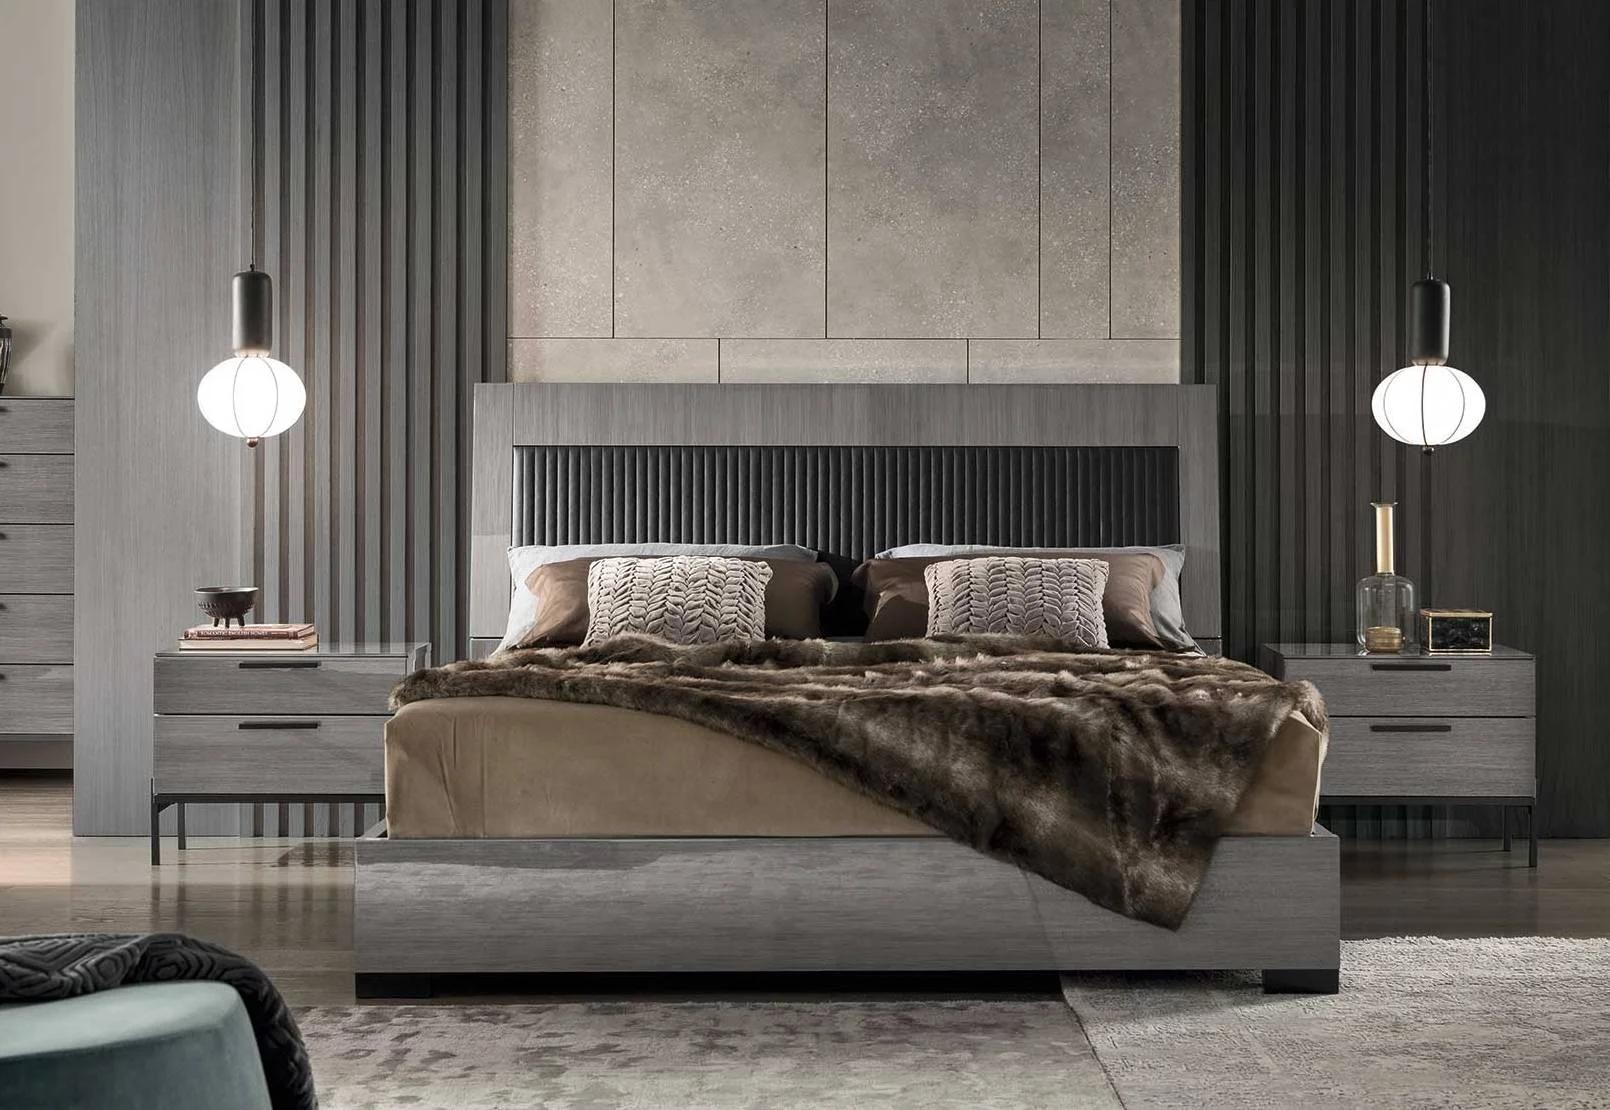 Discover Your Bedroom Style With Top Picks From C&M